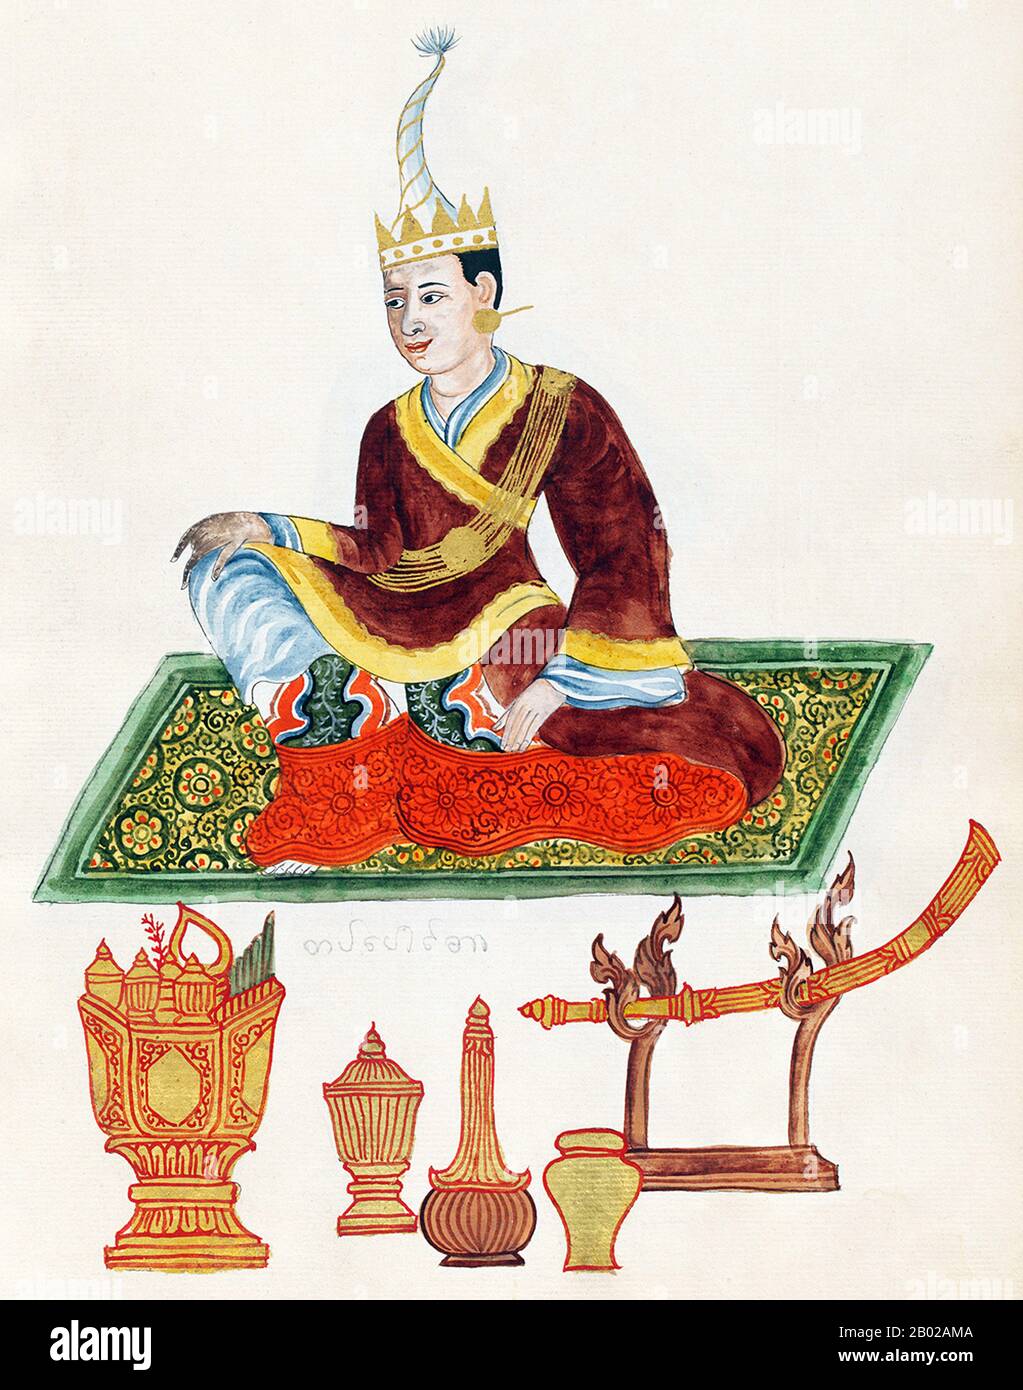 The Konbaung Dynasty was the last dynasty that ruled Burma (Myanmar), from 1752 to 1885. The dynasty created the second largest empire in Burmese history, and continued the administrative reforms begun by the Toungoo dynasty, laying the foundations of modern state of Burma.  The reforms proved insufficient to stem the advance of the British, who defeated the Burmese in all three Anglo-Burmese wars over a six-decade span (1824–1885) and ended the millennium-old Burmese monarchy in 1885. Stock Photo